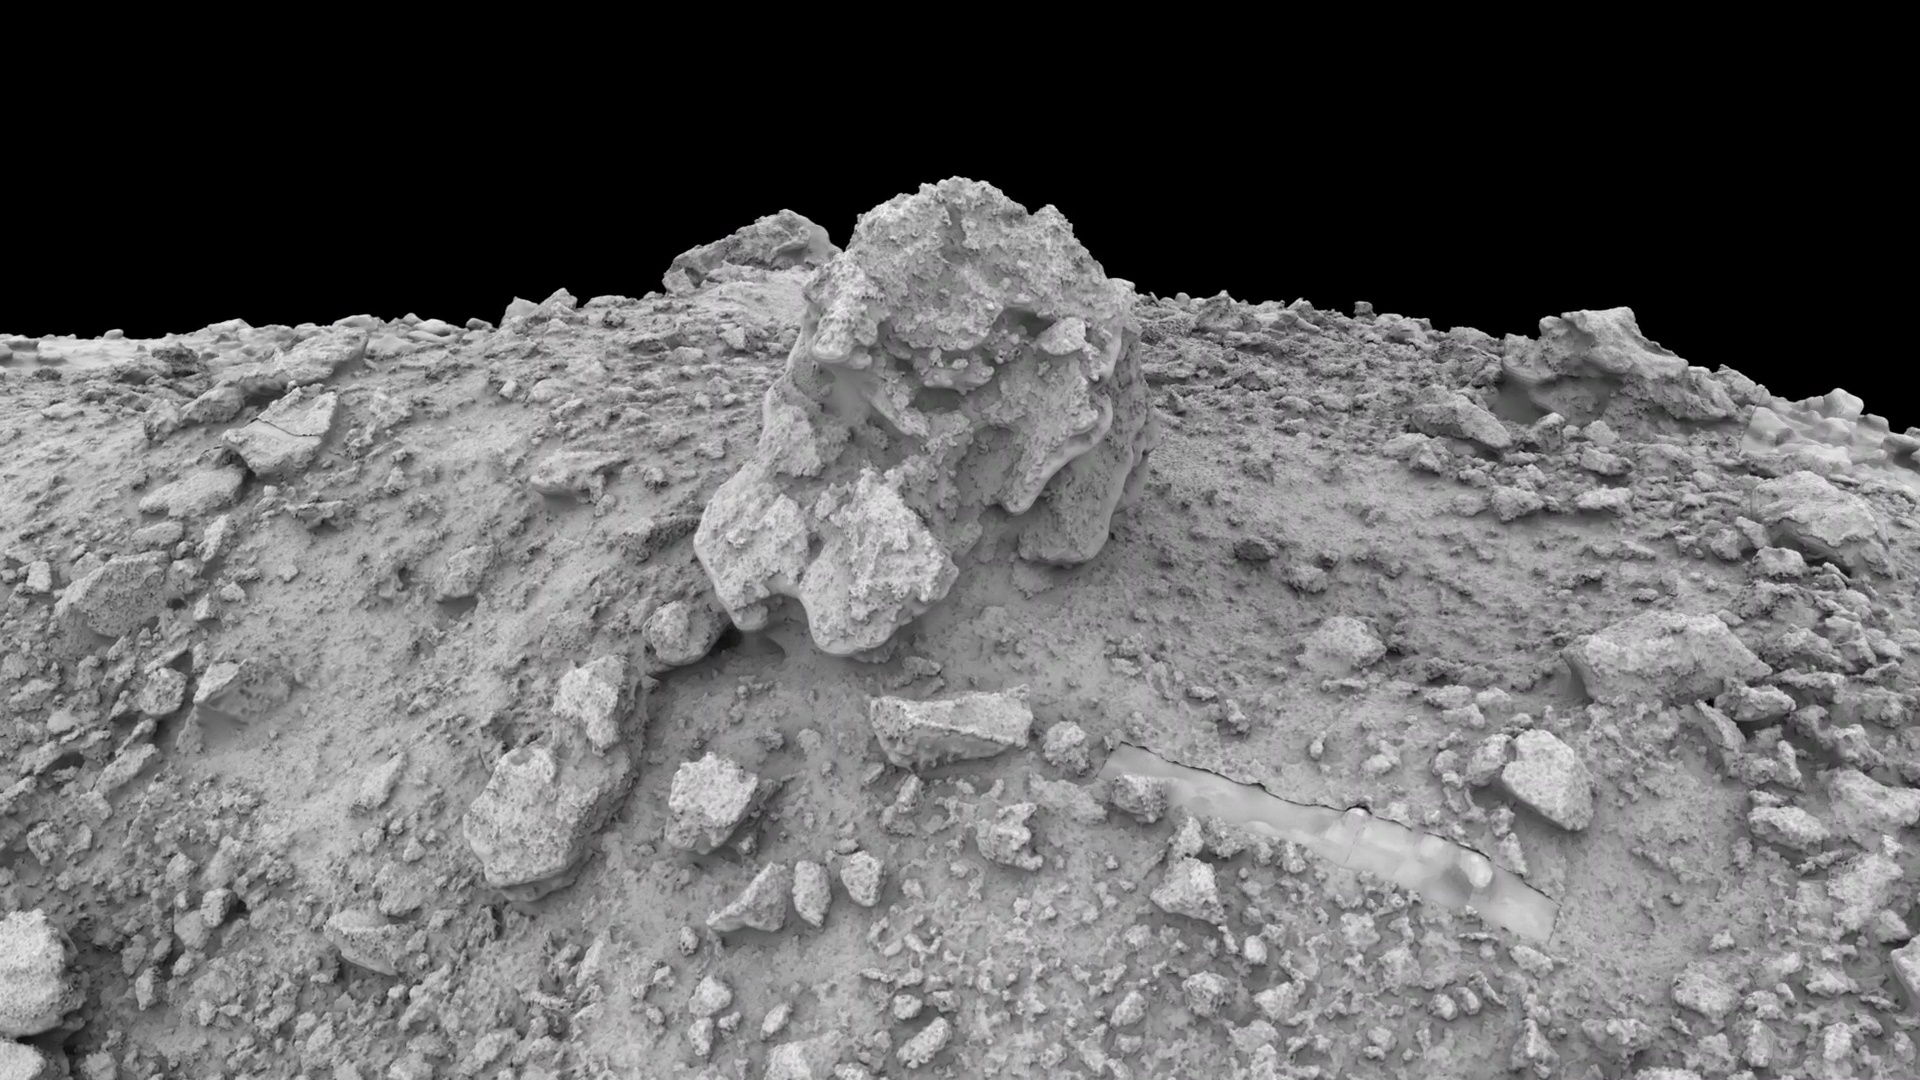 Preview Image for Exploring Asteroid Bennu Through Technology